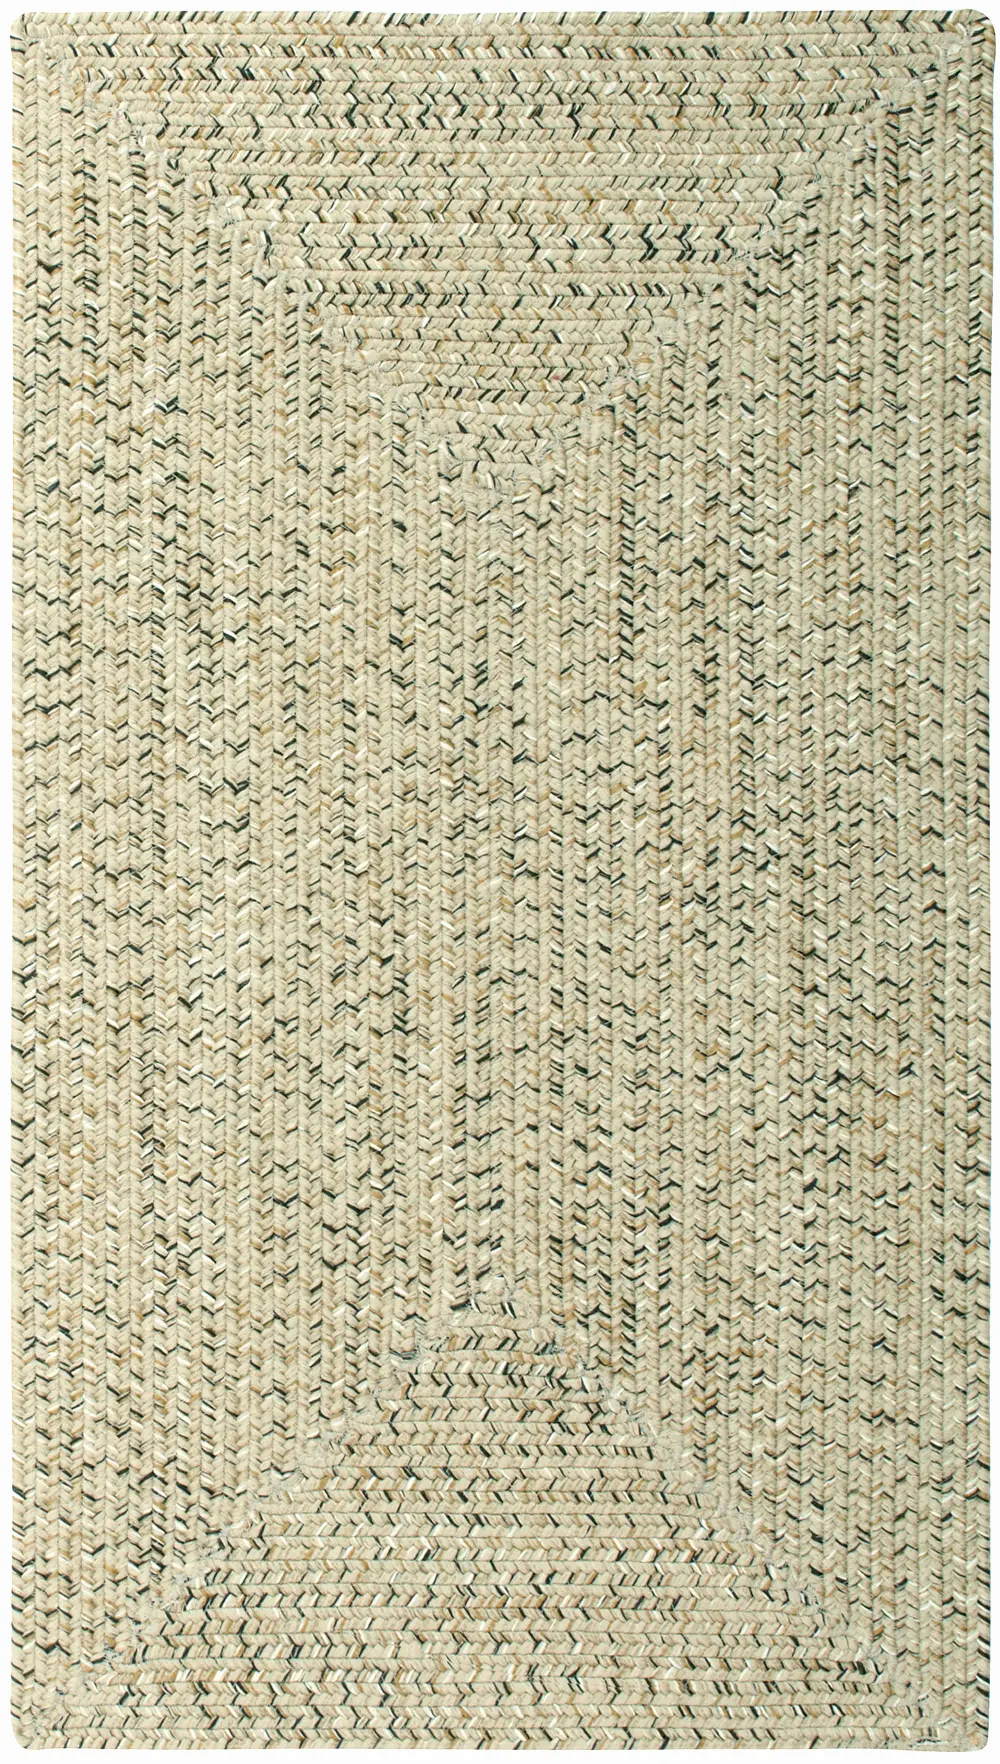 0110QS05000800600 5 x 8 Medium Shell Taupe Braided Indoor-Outdoor Rug - Sea Glass-1